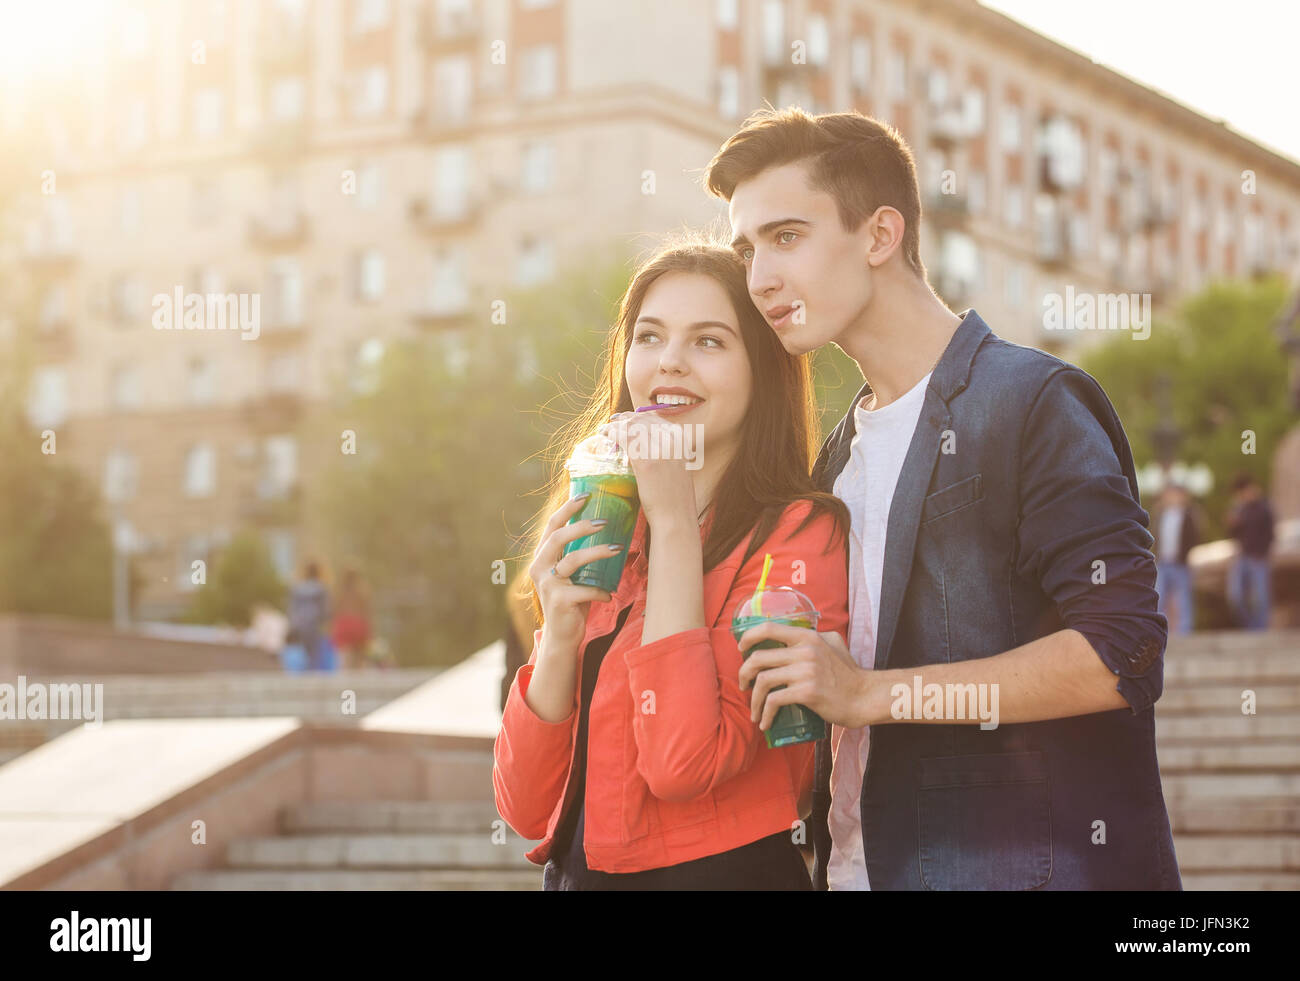 Teenagers drink fruit fresh from glasses. They are talking. A couple in love on a date. Romance of first love. Stock Photo